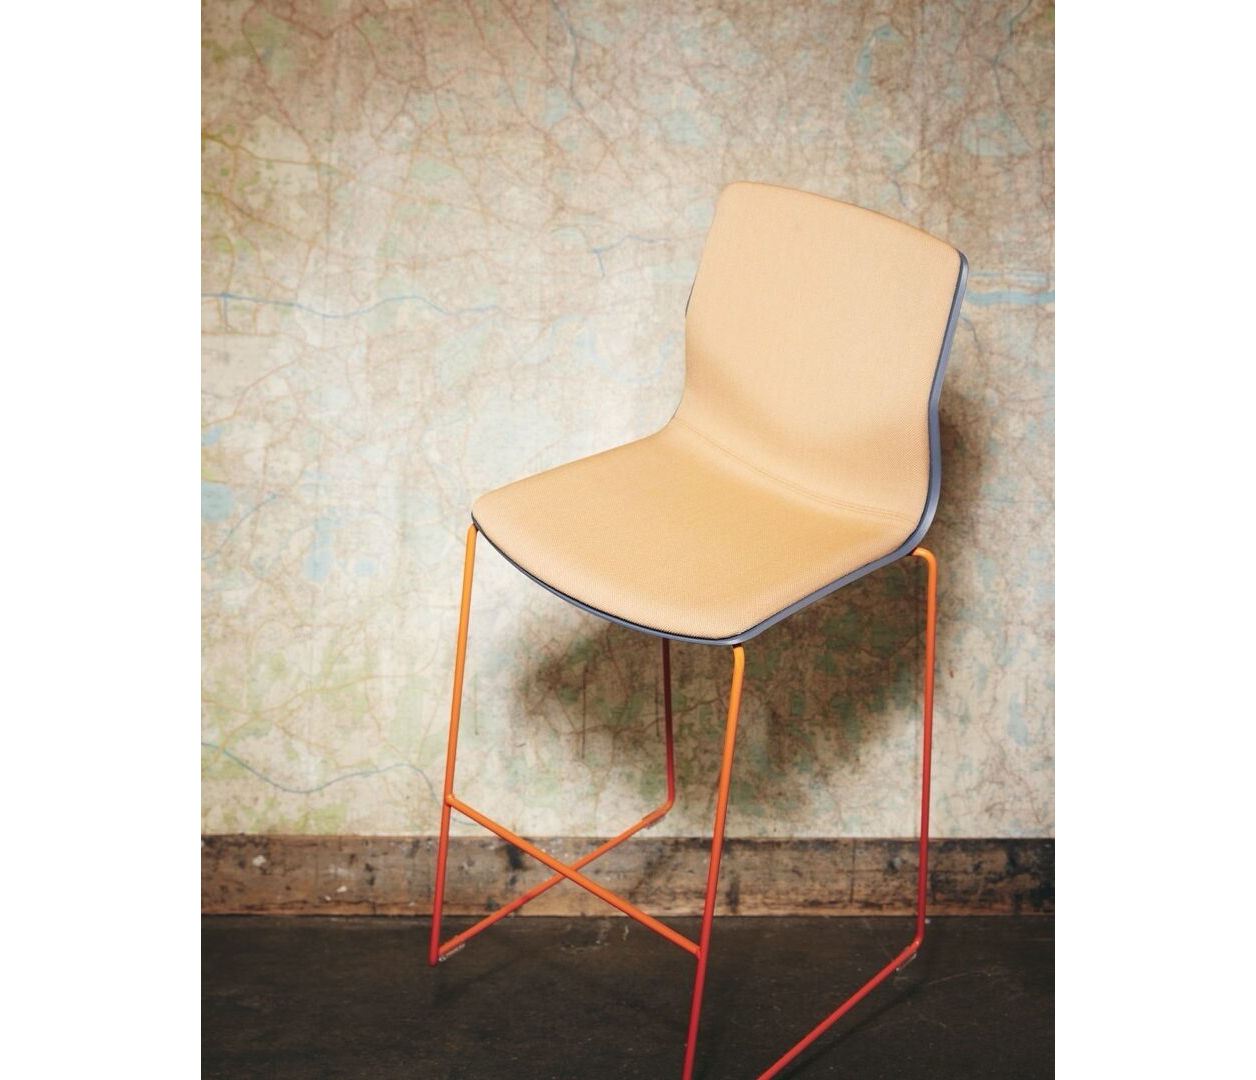 OCEE&FOUR – Chairs – FourSure 105 – Marketing Image 1 Large 2 Large